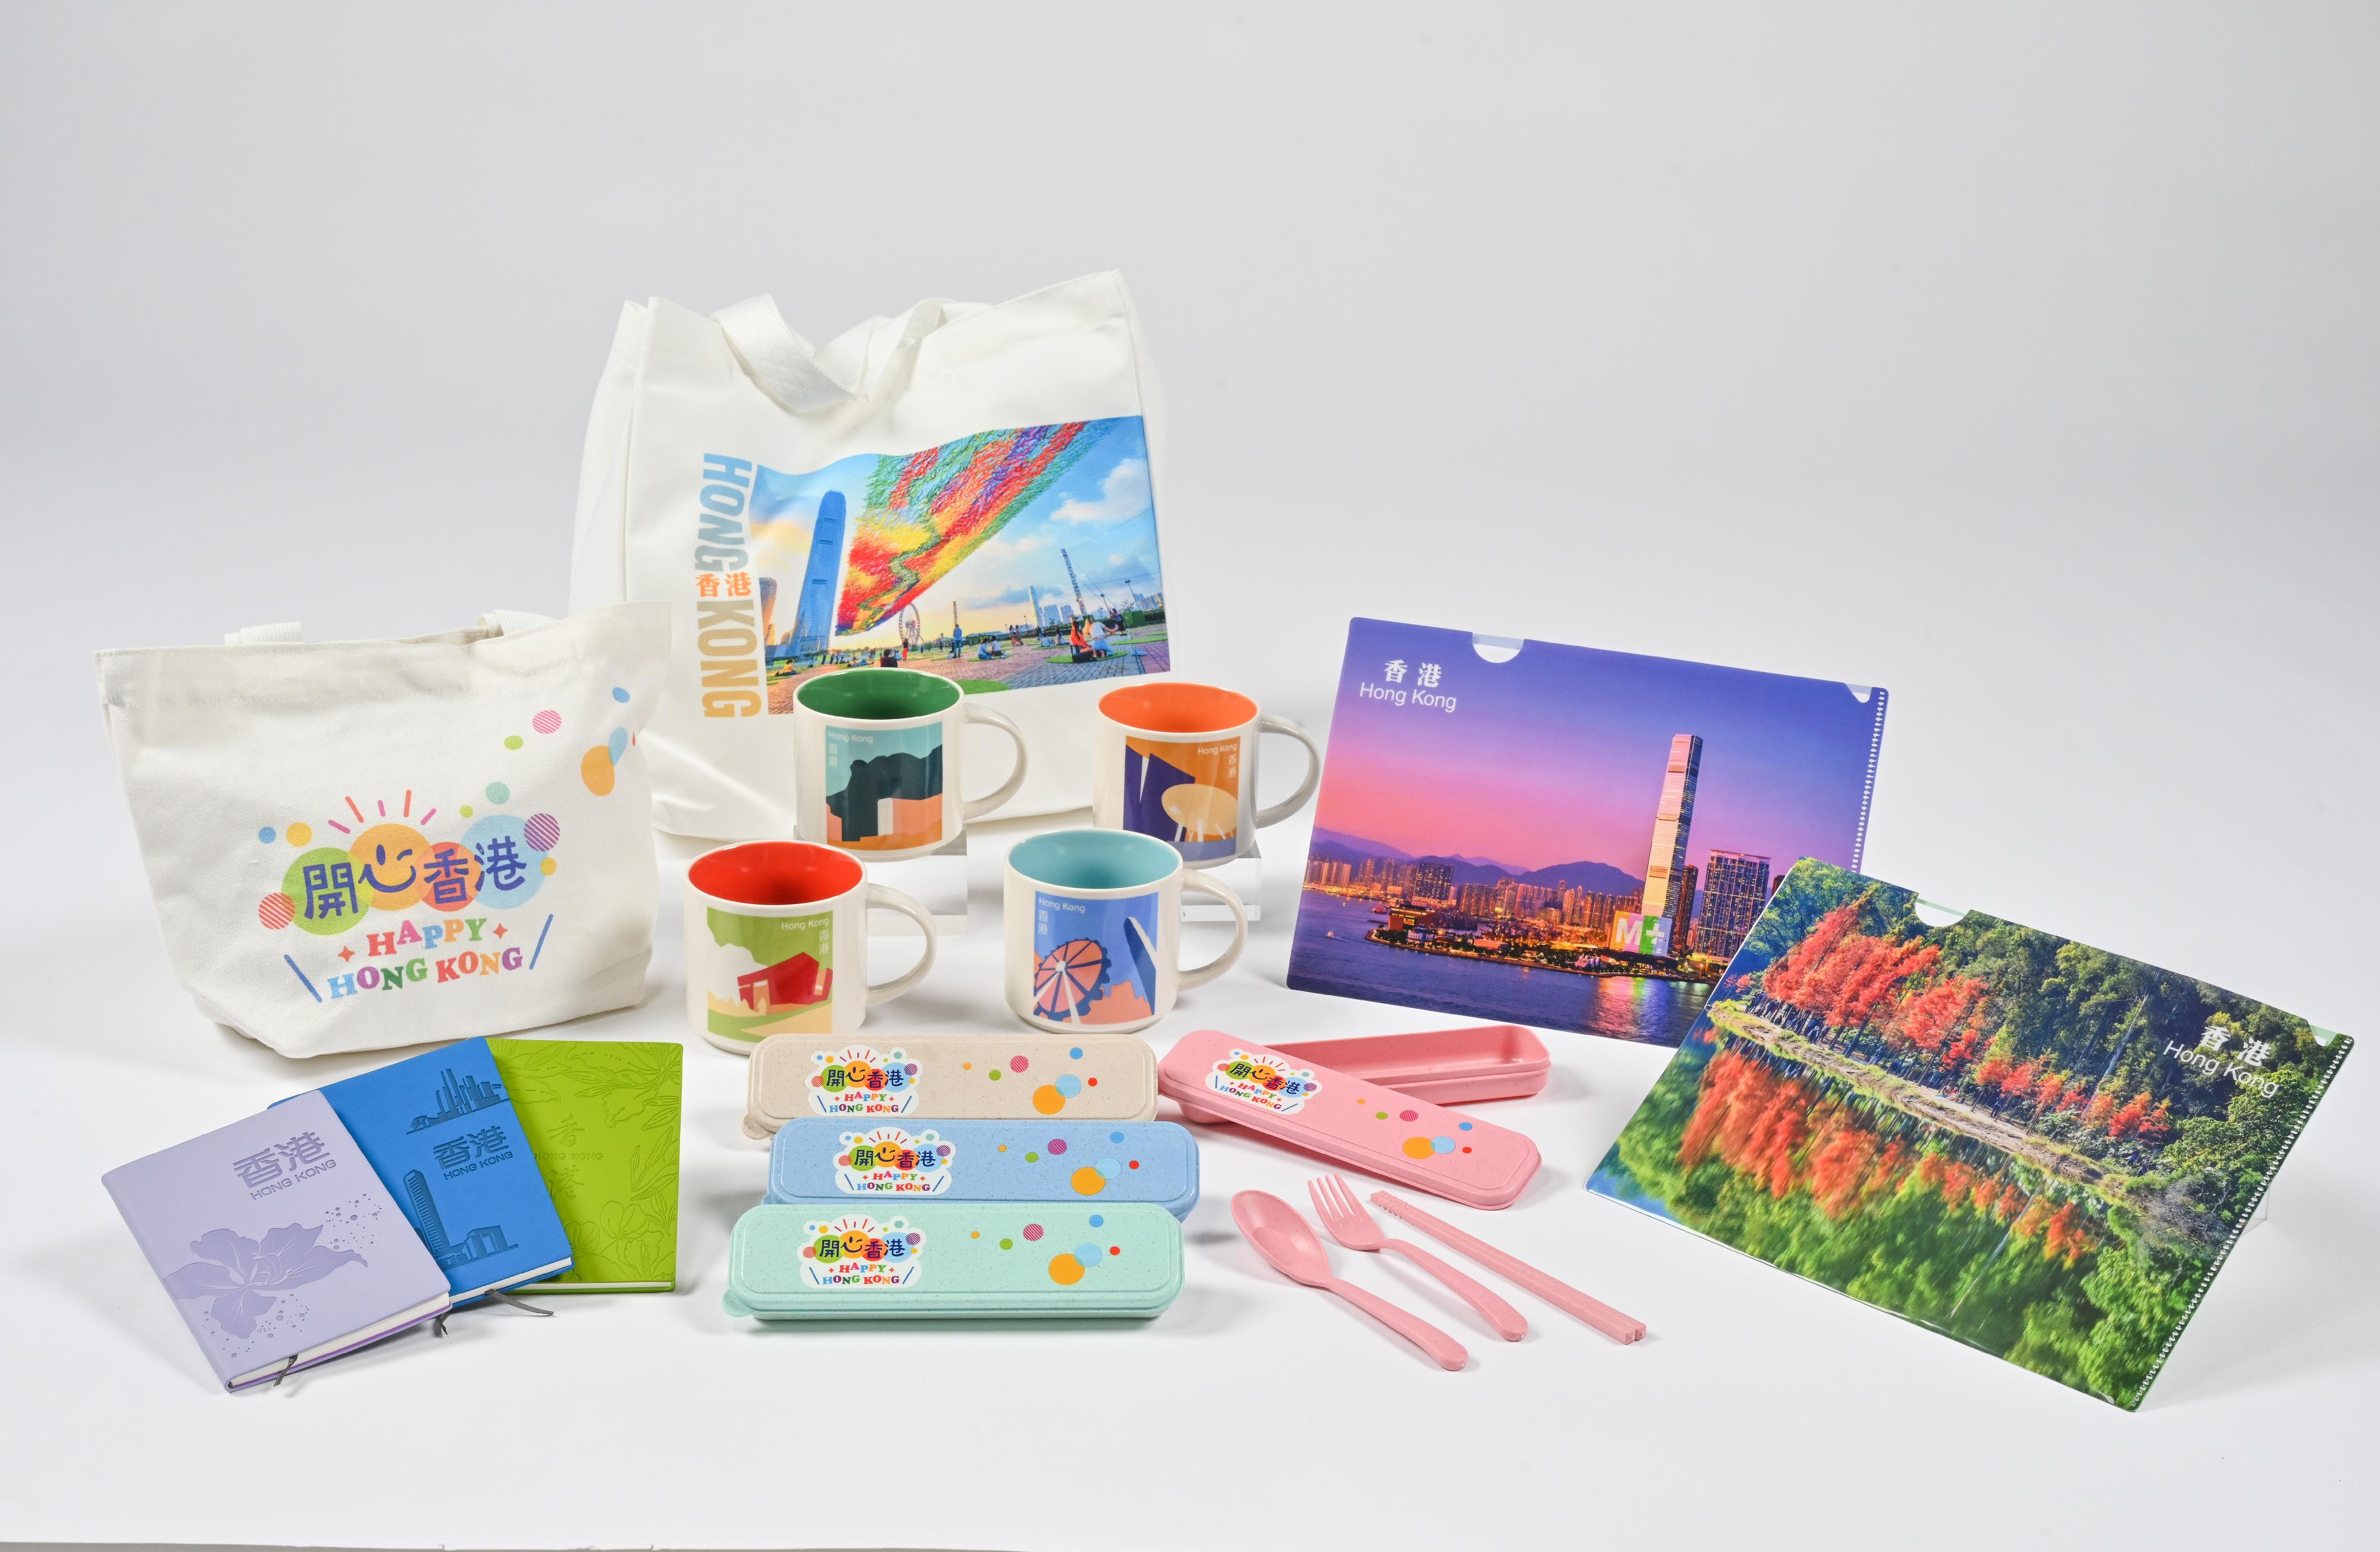 The Government Gift Shop offers a range of items including memorabilia featuring Hong Kong scenery, tourism landmarks and "Happy Hong Kong" Campaign designs. 